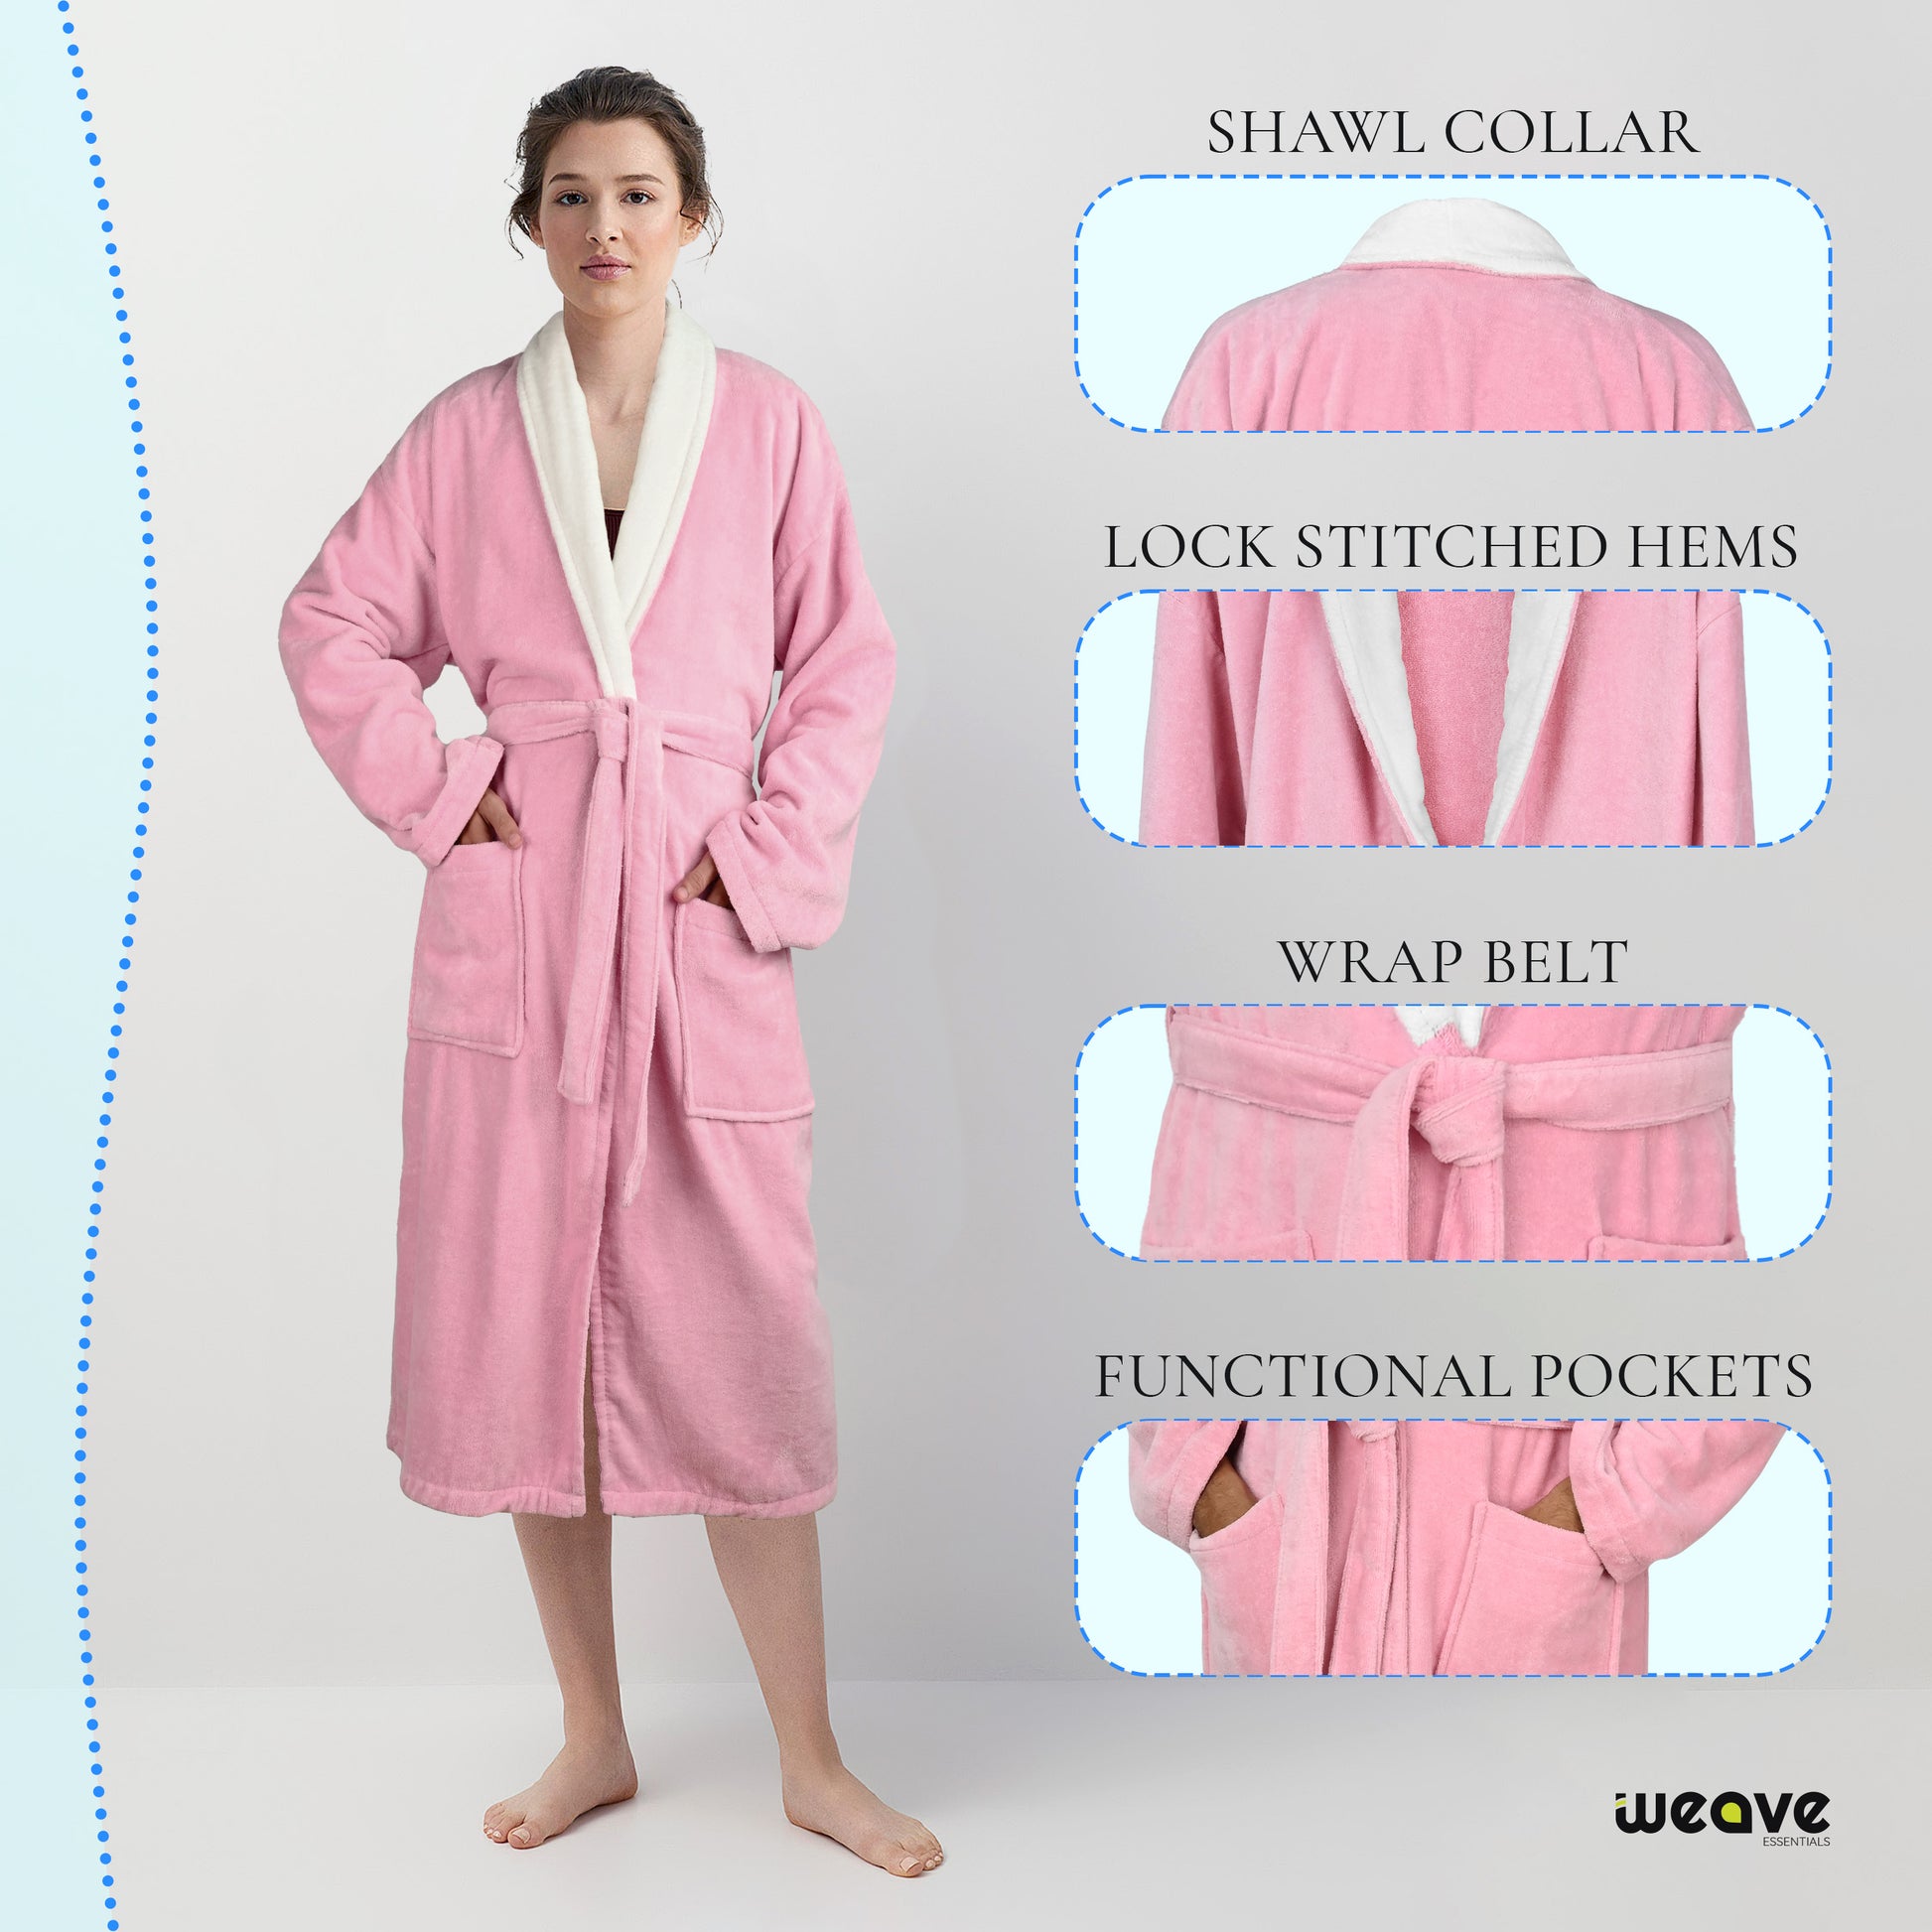 Halocline Towel Robe Review - A Hot Tub Essential!